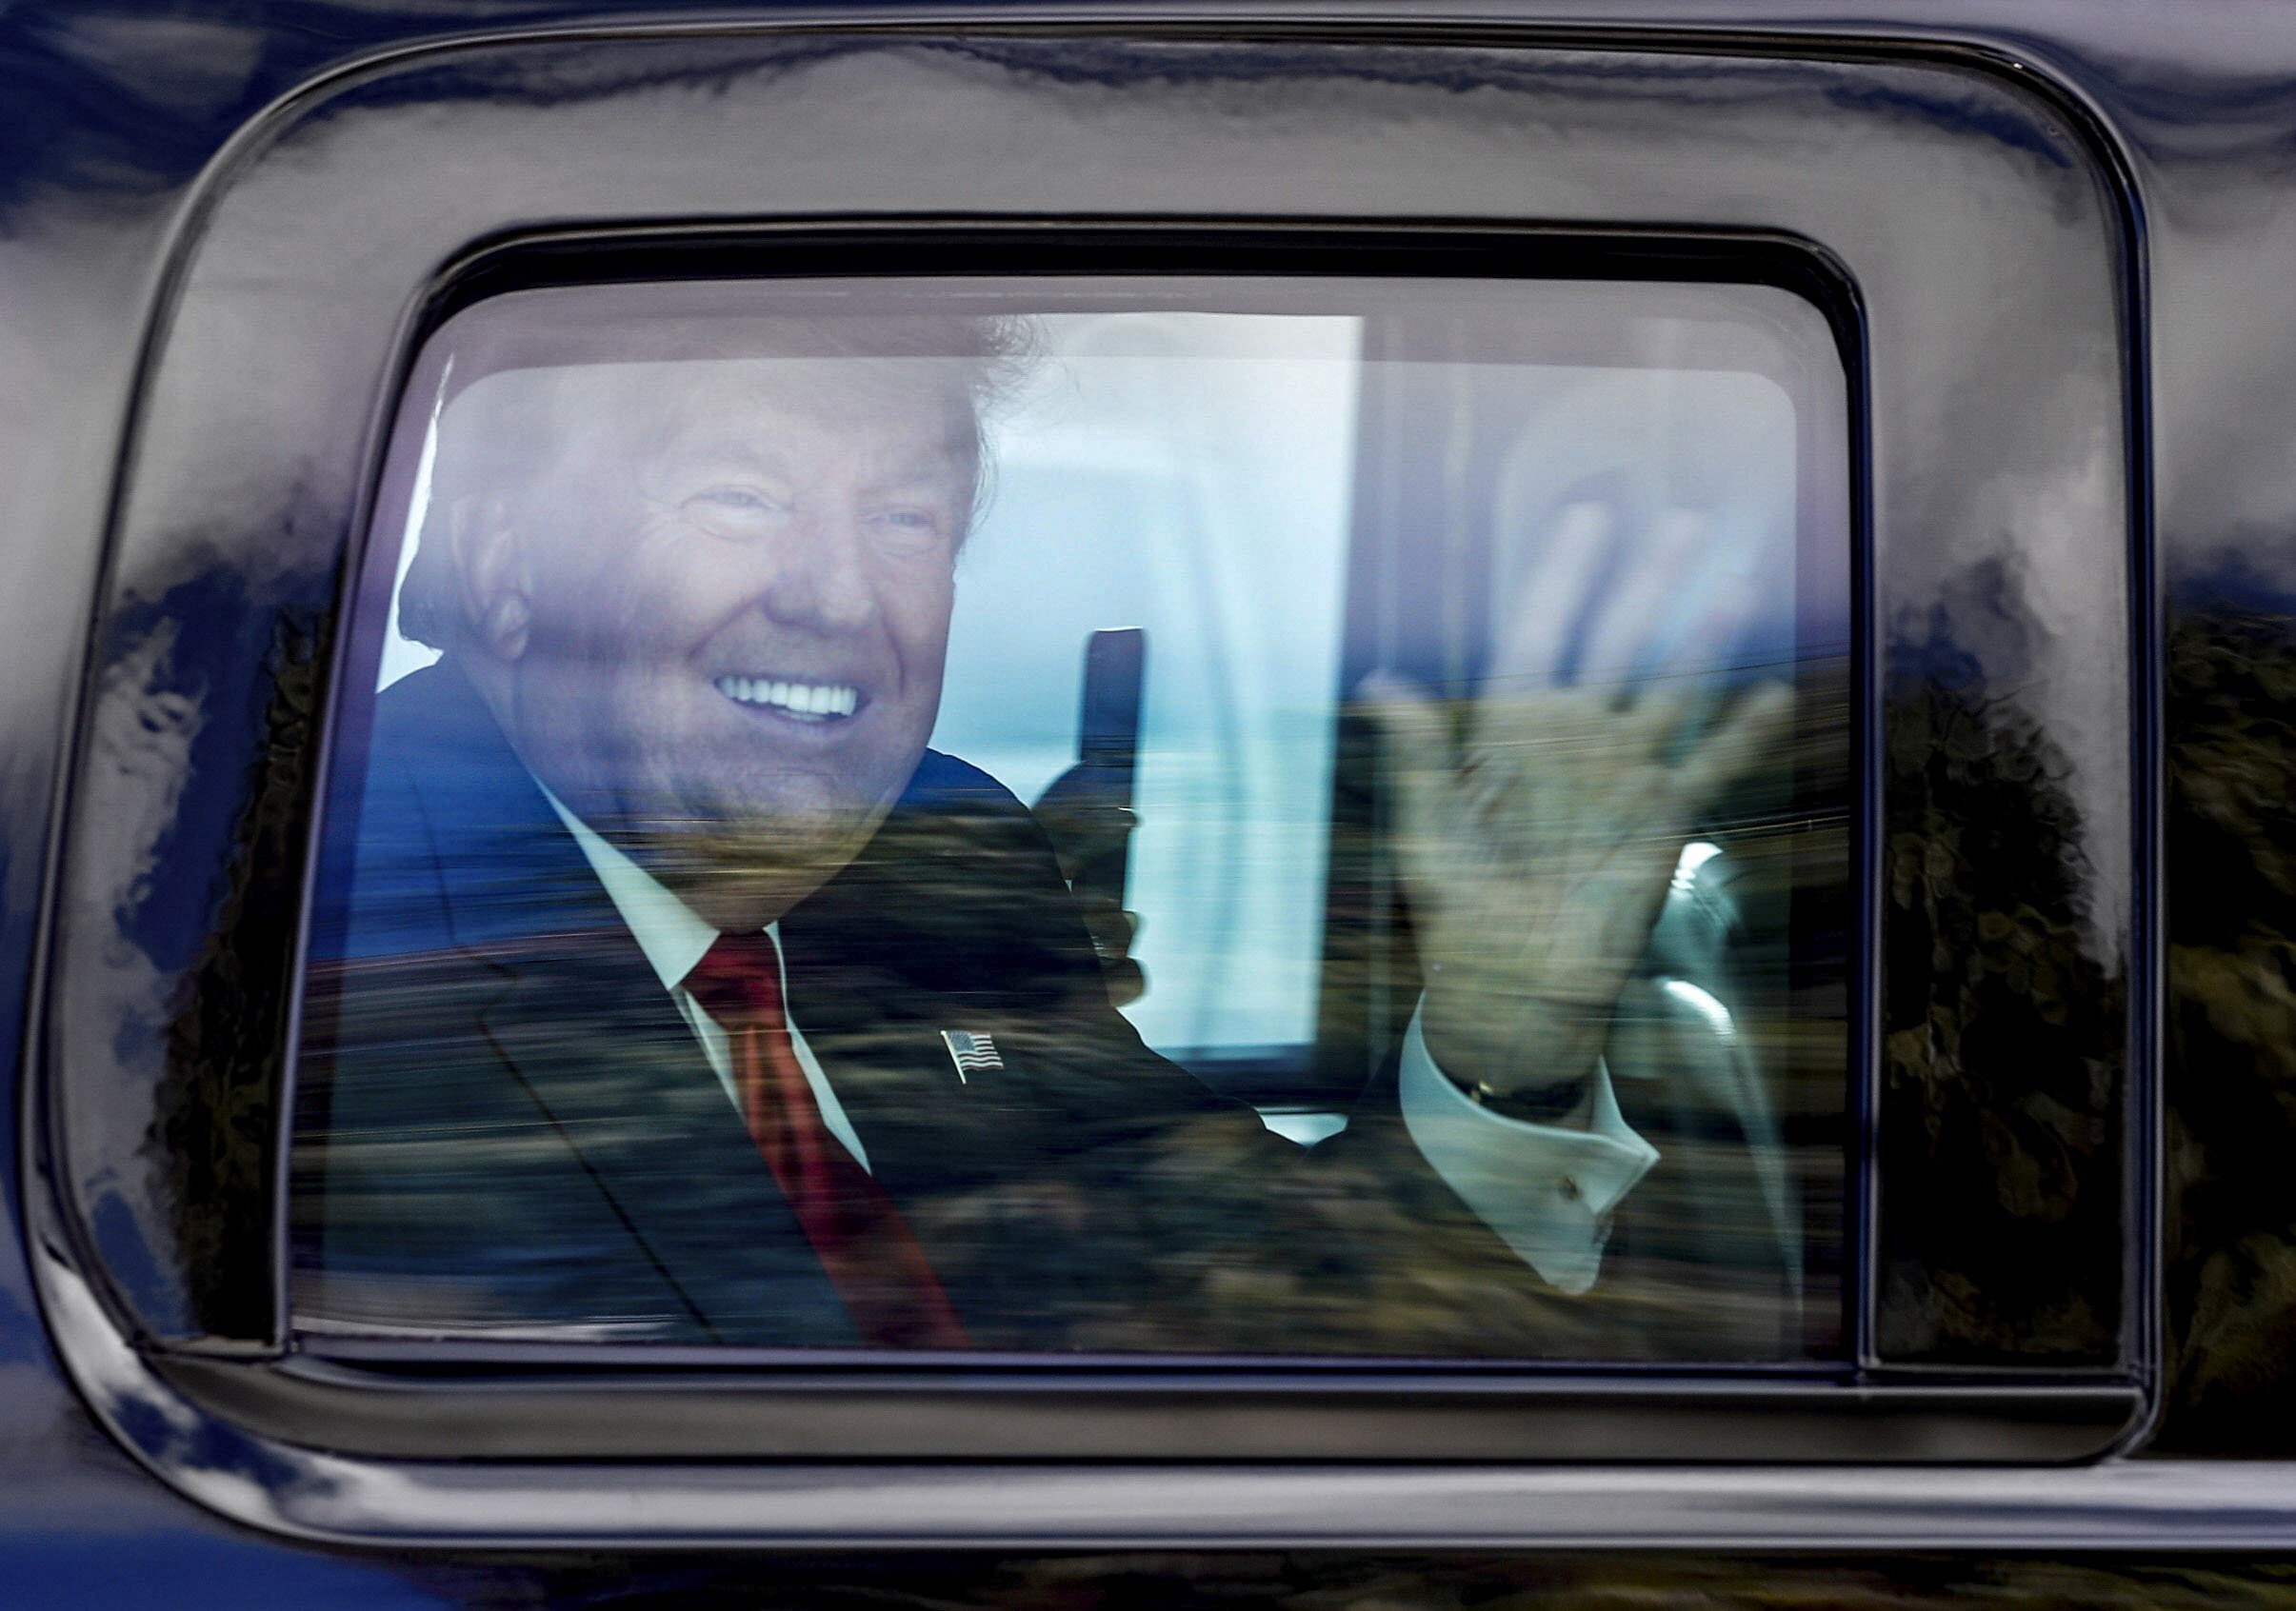 Former president Donald Trump waves to supporters as his motorcade drives through West Palm Beach, Florida. File photo: AP